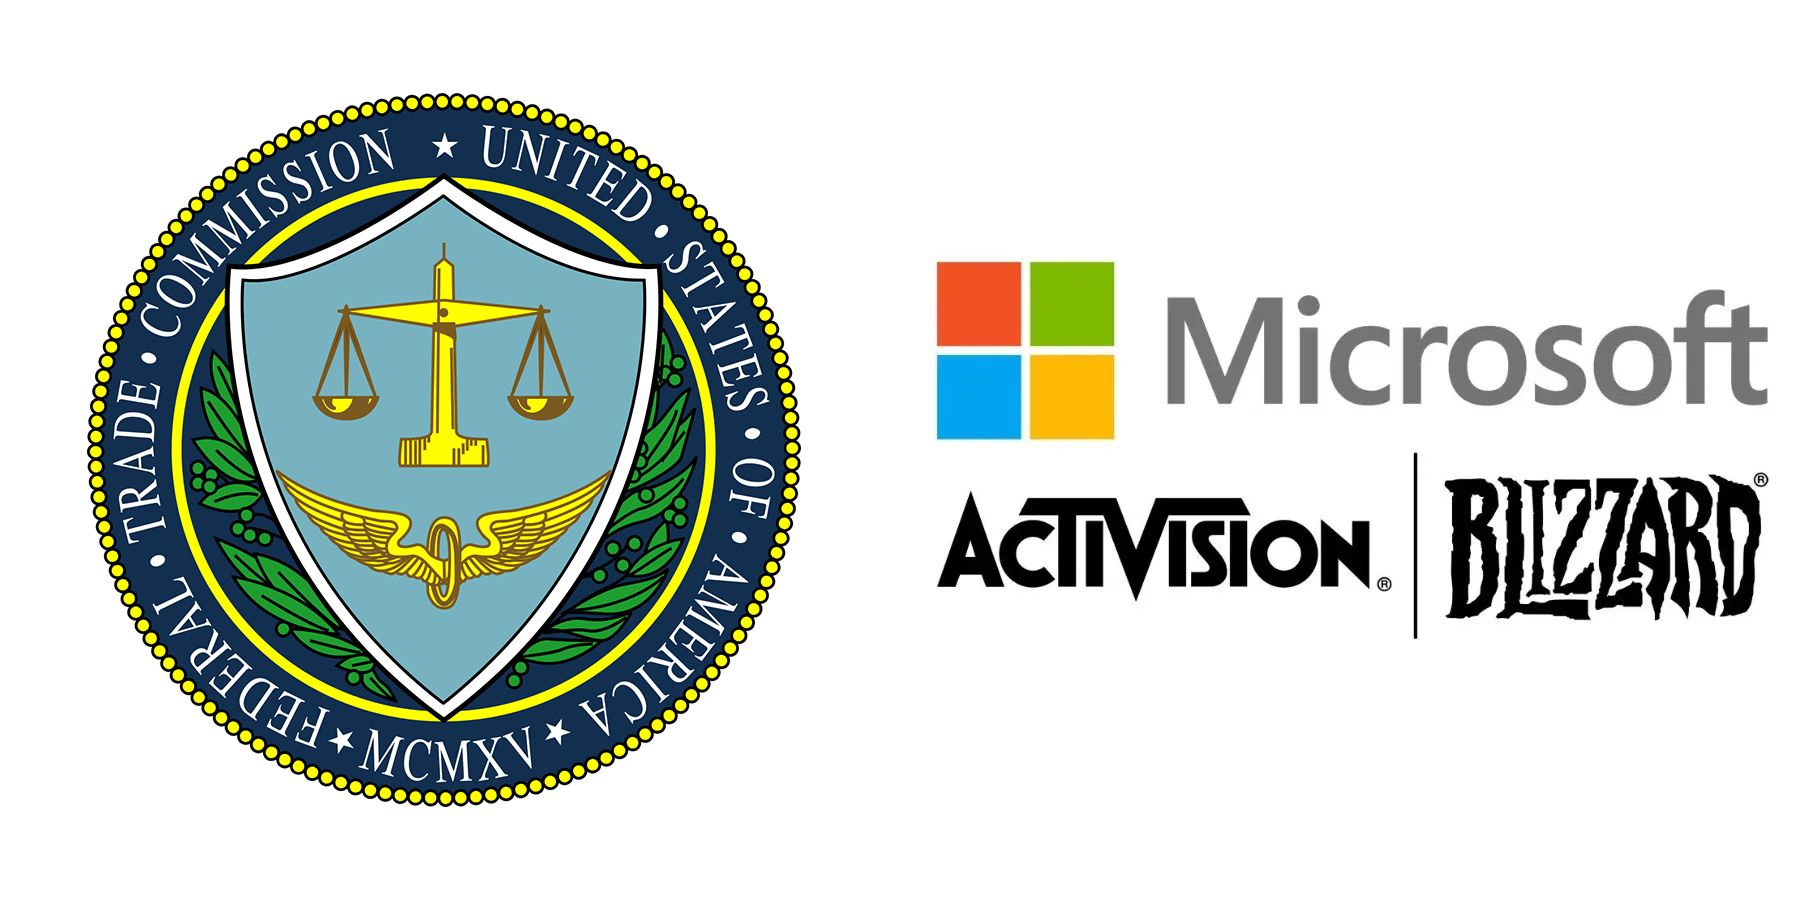 United States Federal Trade Commission and Microsoft Activision Blizzard logos on white